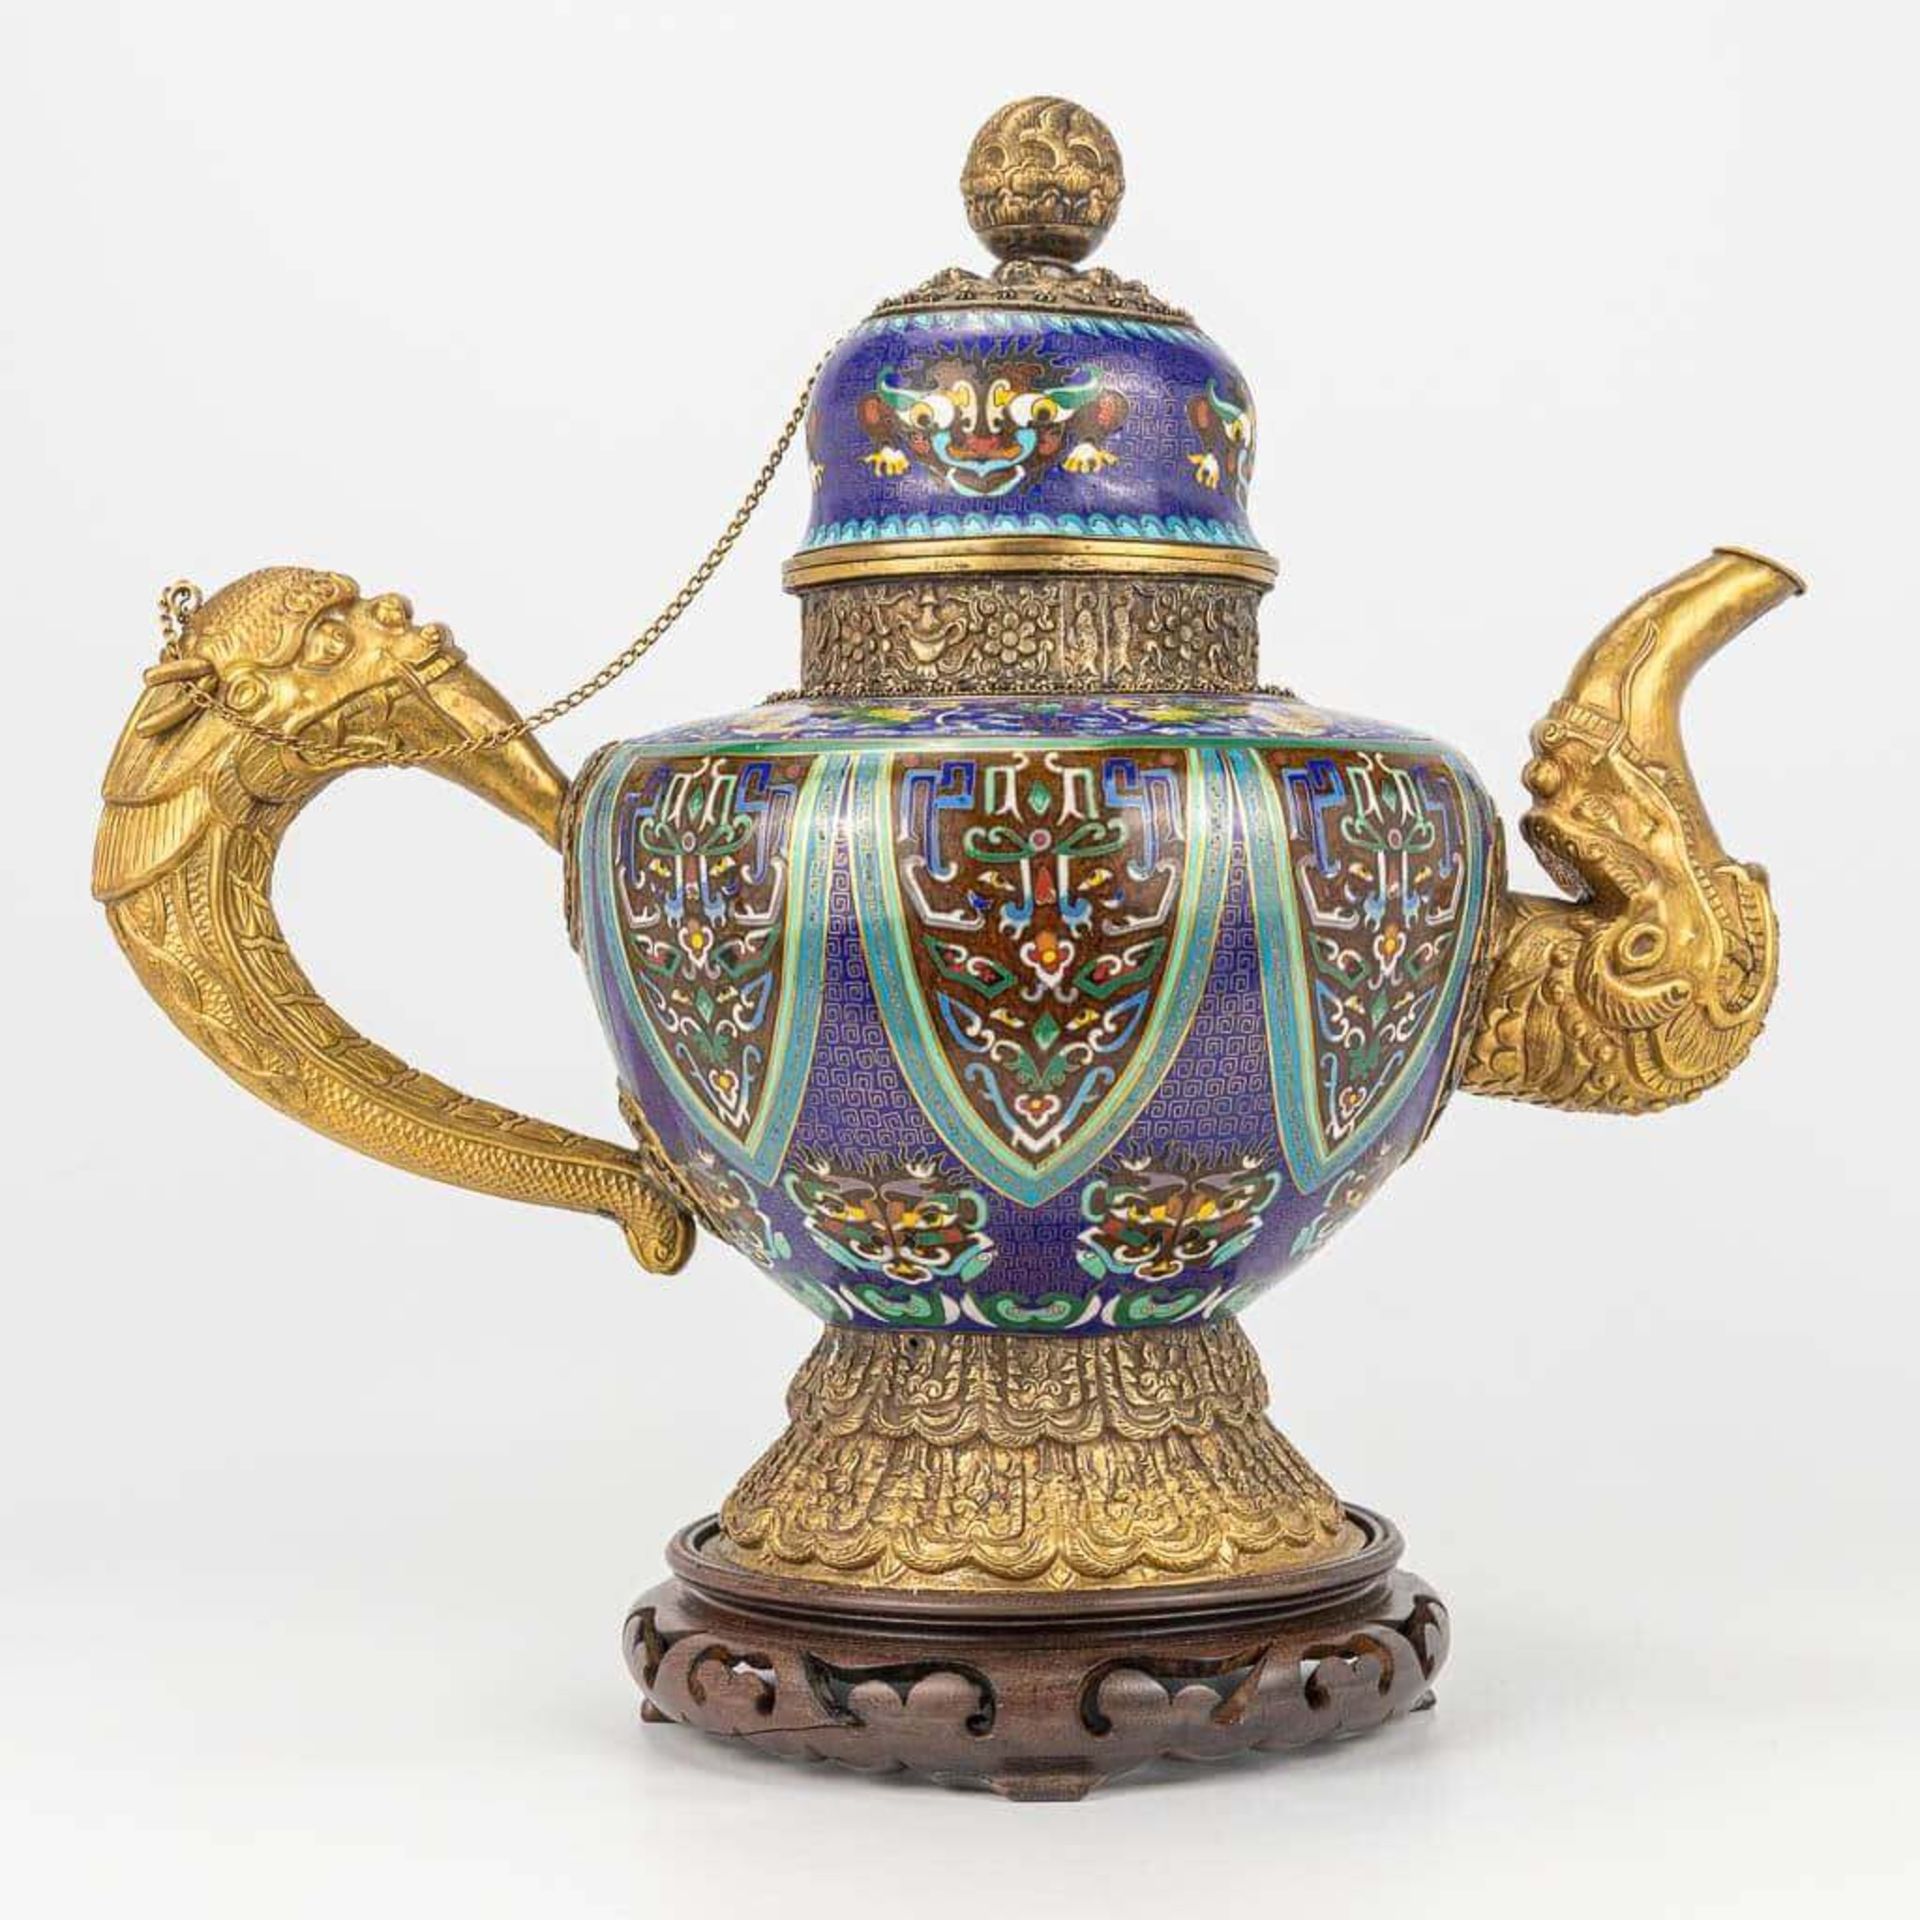 A Tibetan ceremonial ewer made of gilt bronze and finished with cloisonnŽ bronze.